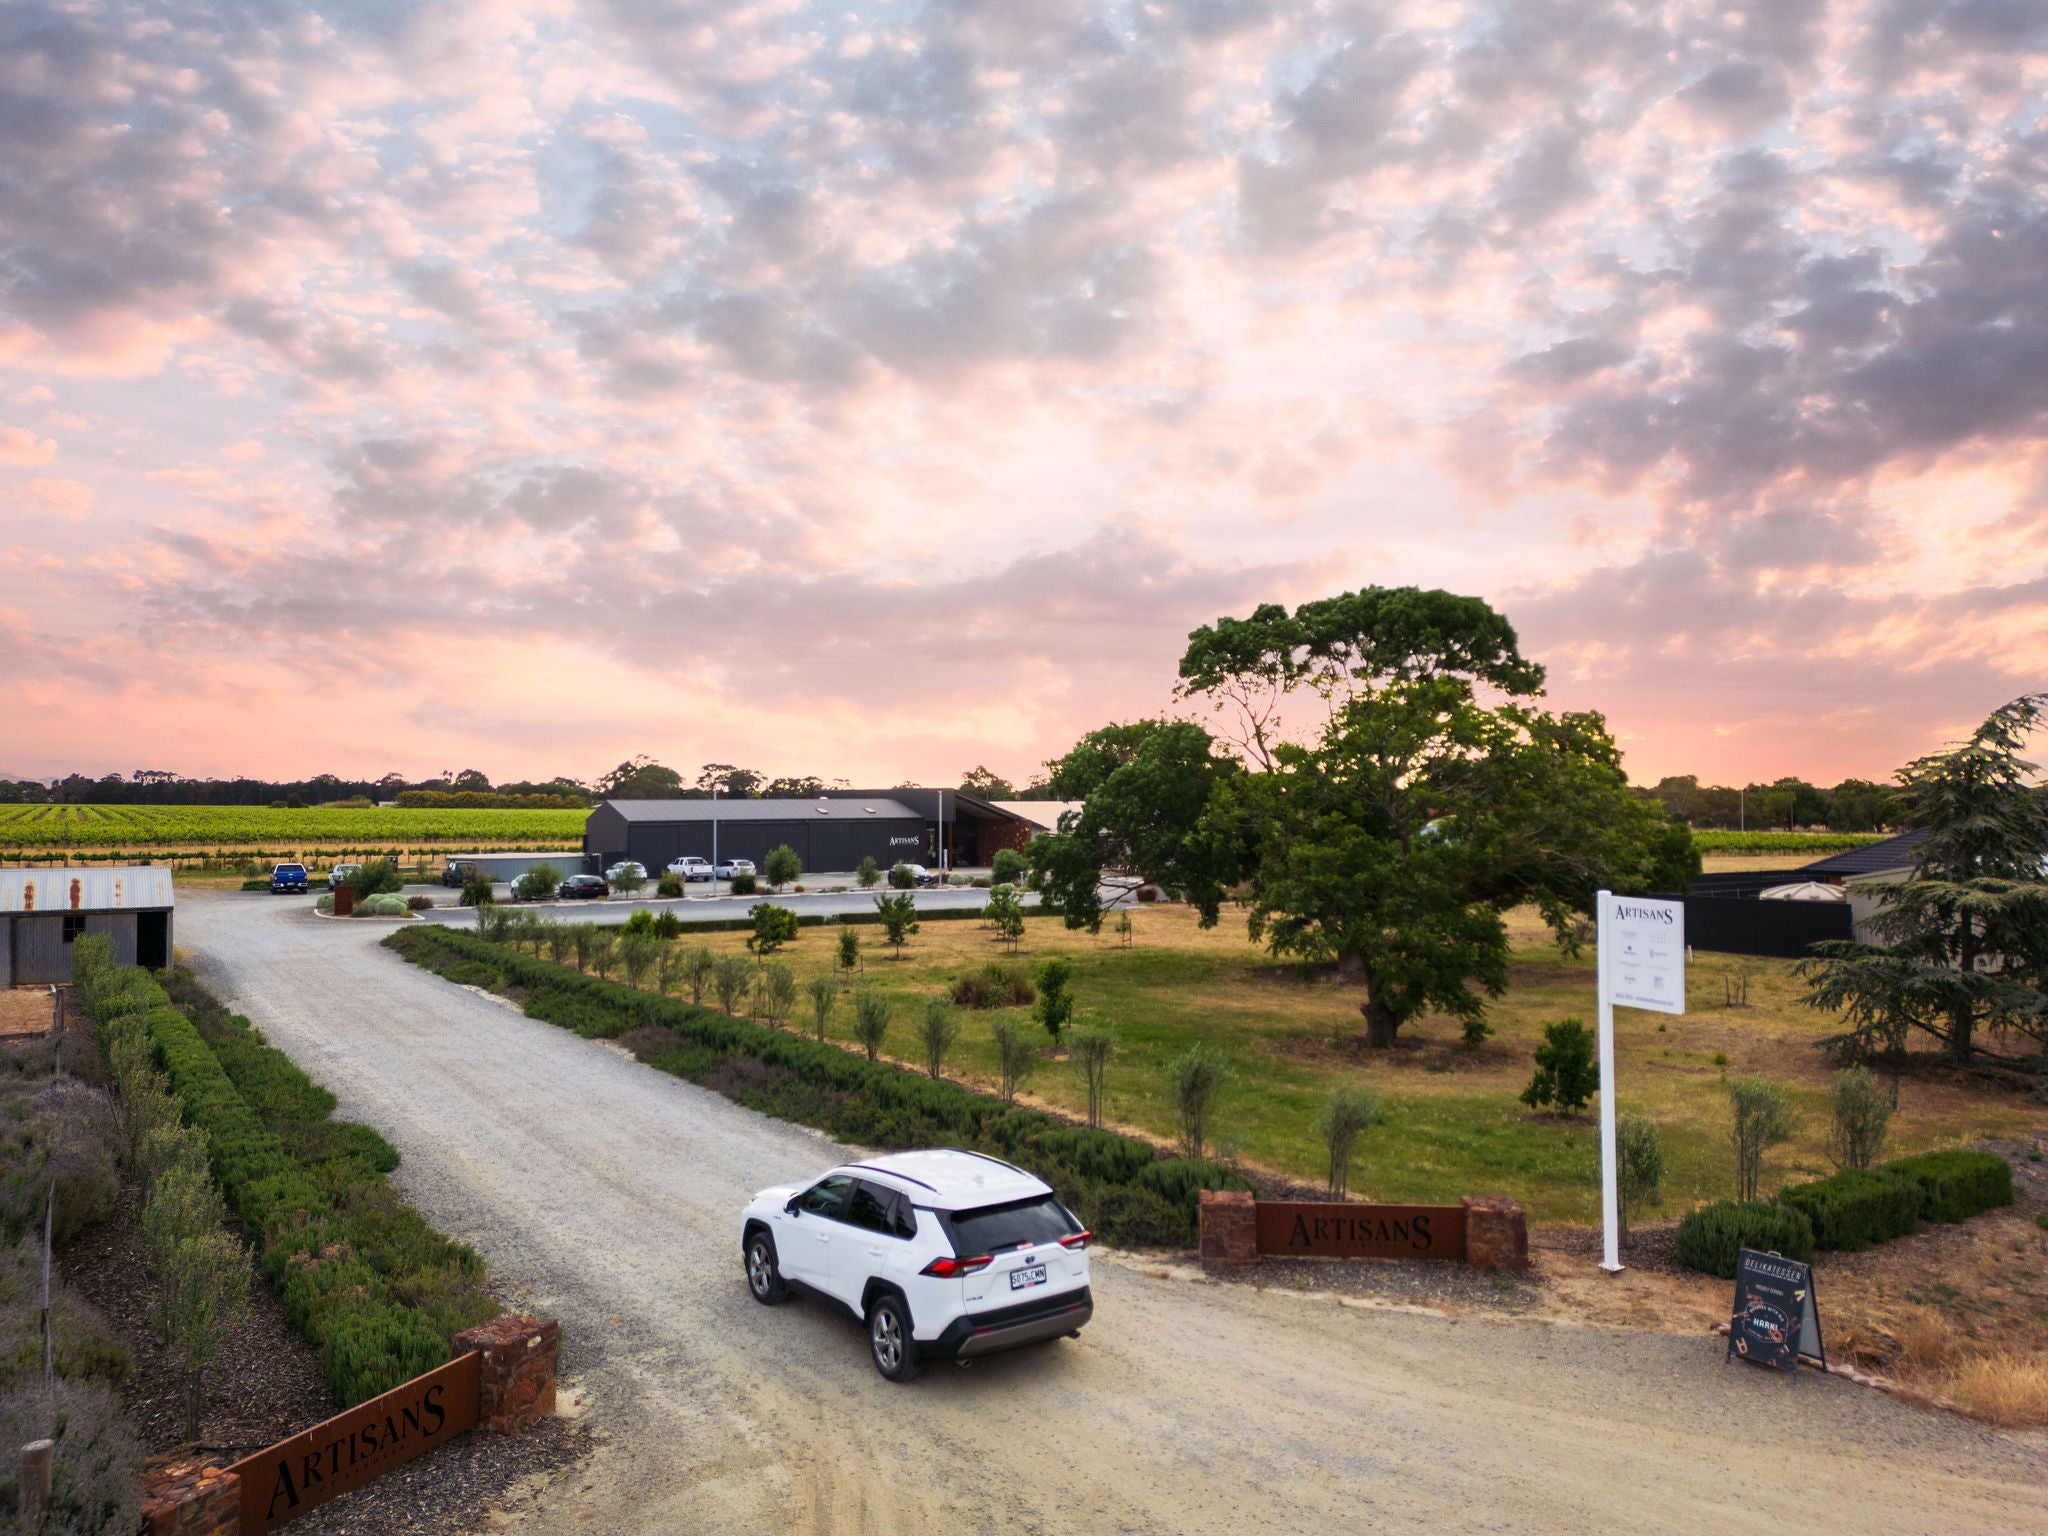 Discovering the Scenic Route: How to Drive to the Barossa Valley and Locate Artisans of Barossa